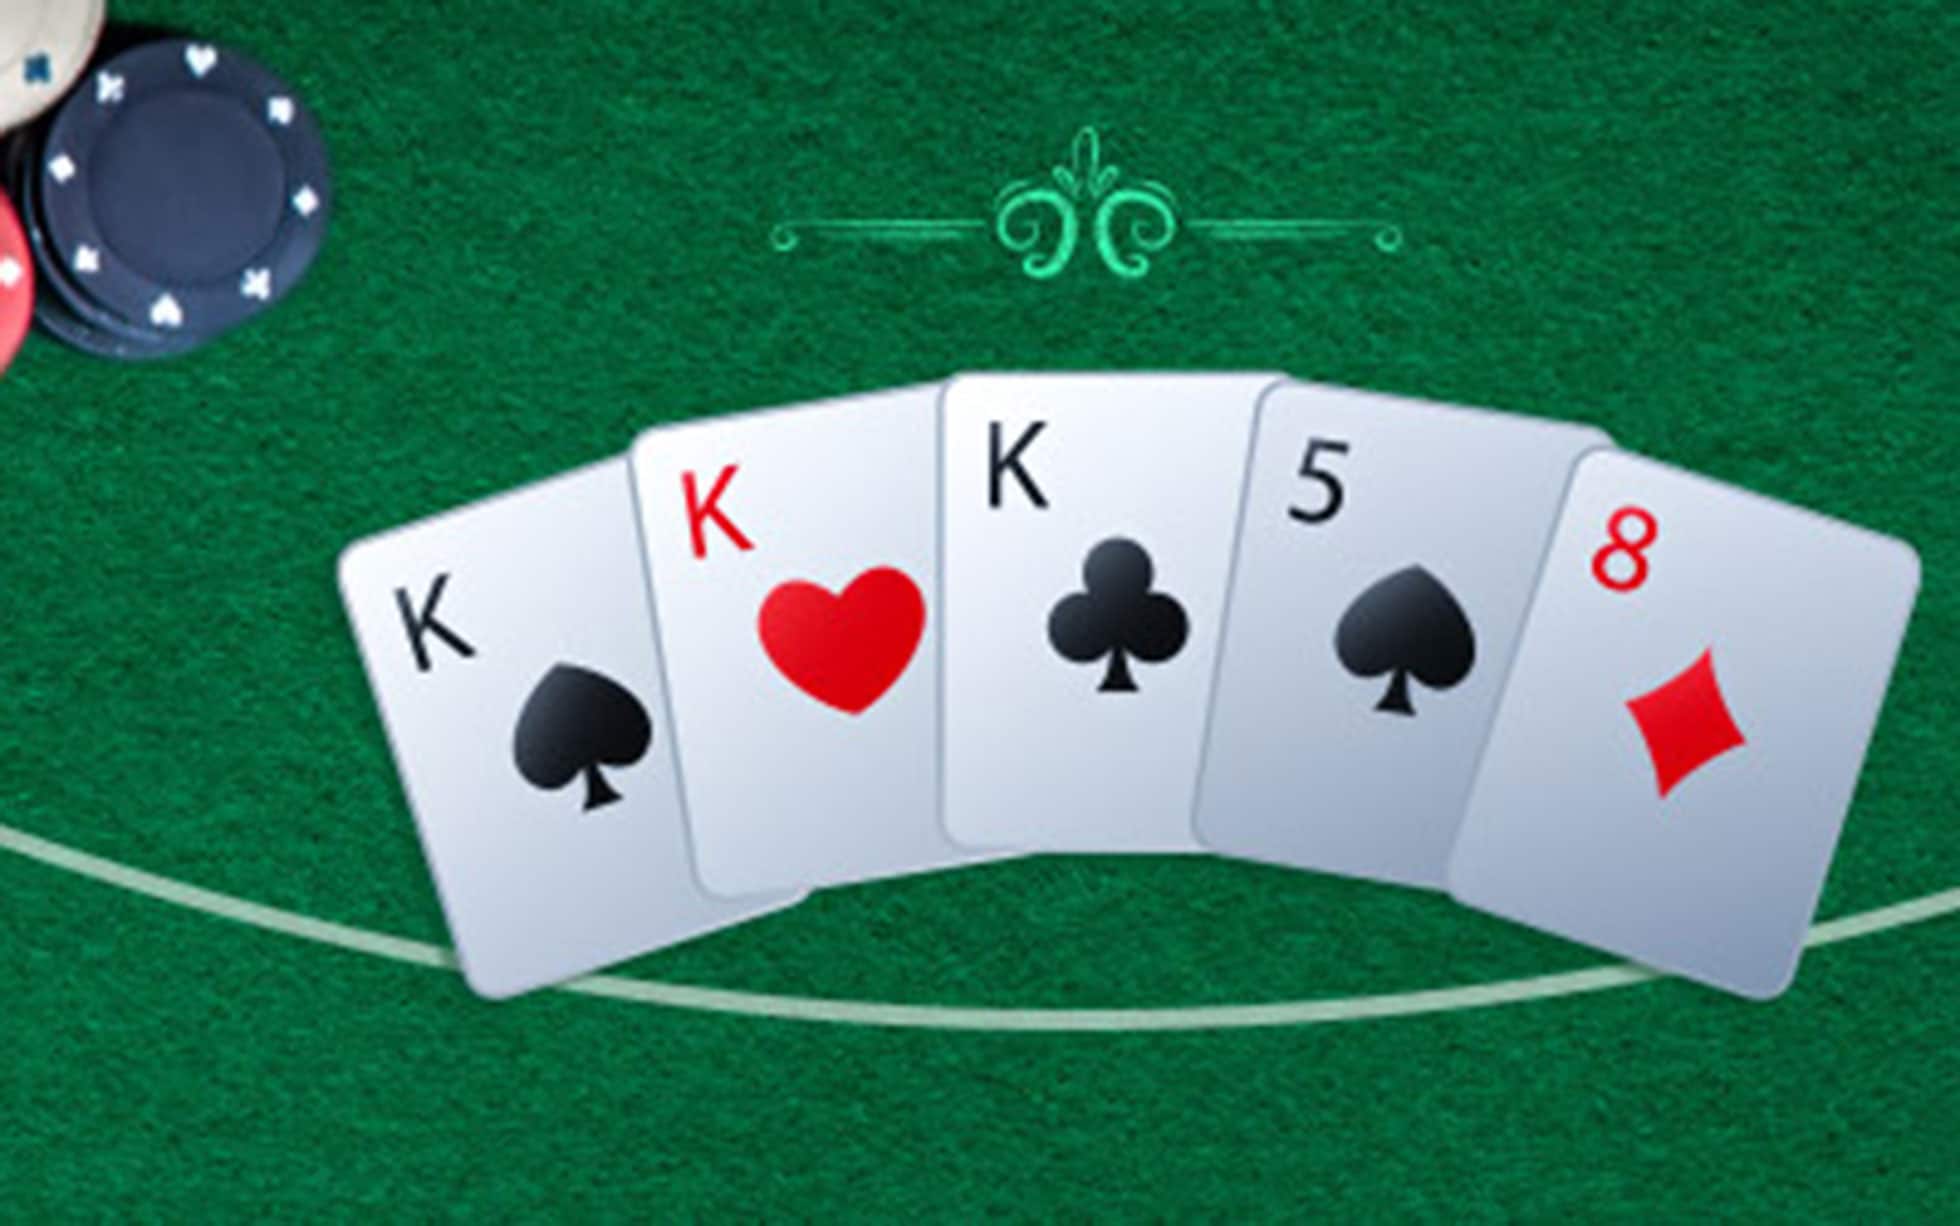 Blackjack Variations at Online Casinos Exploring Exciting Game Options